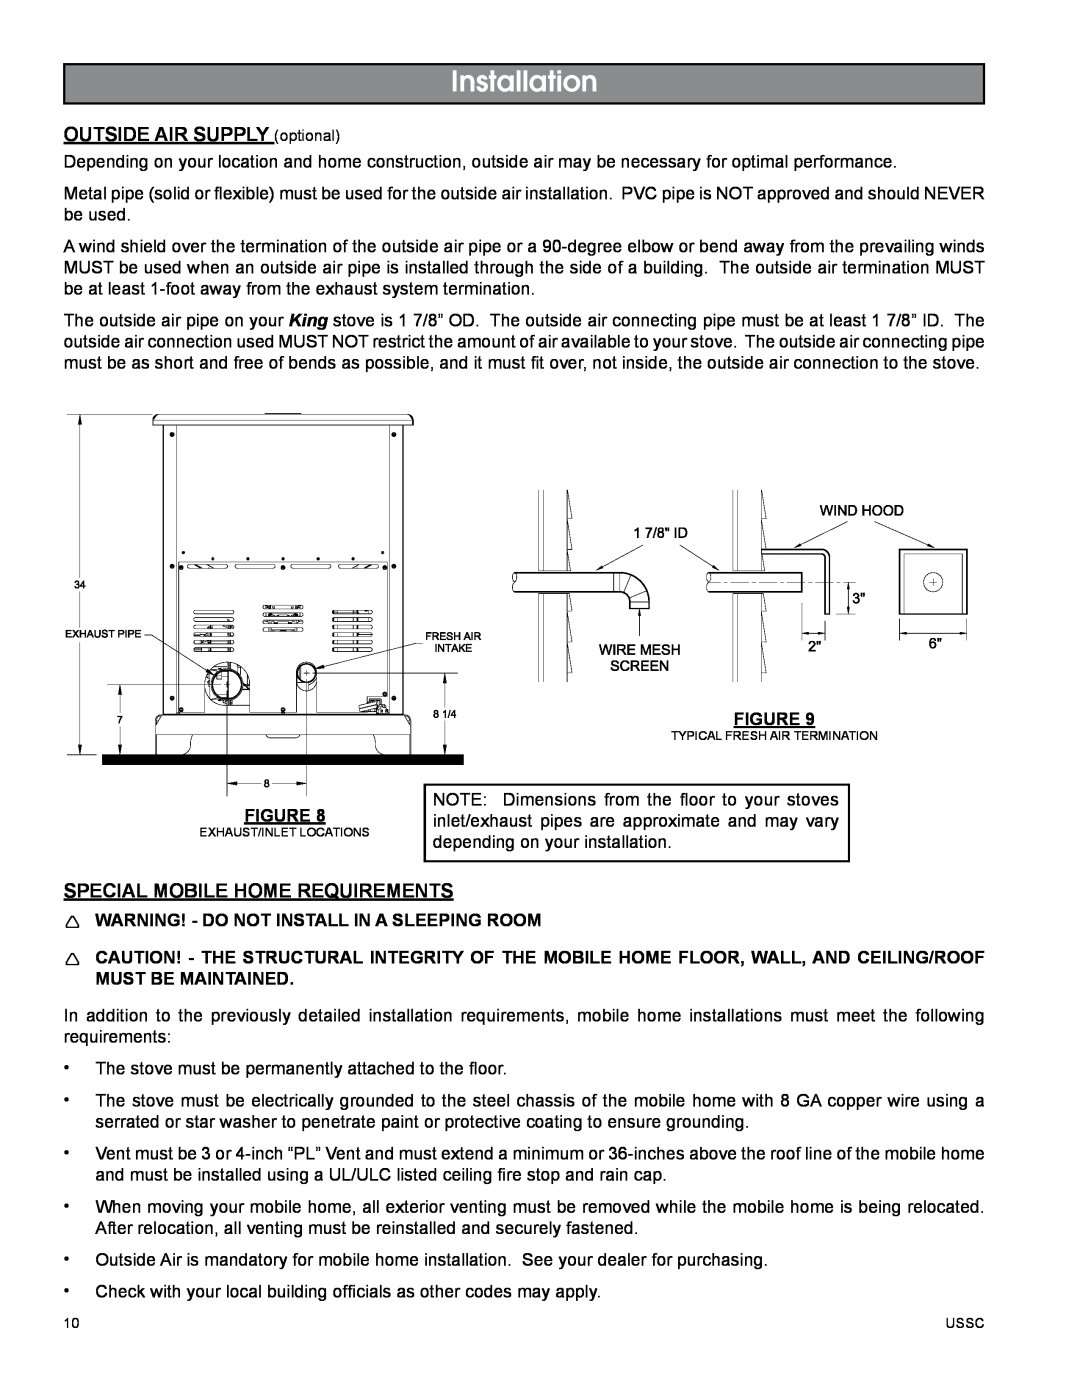 United States Stove 5510 owner manual Installation, Outside Air Supplyoptional, Special Mobile Home Requirements 